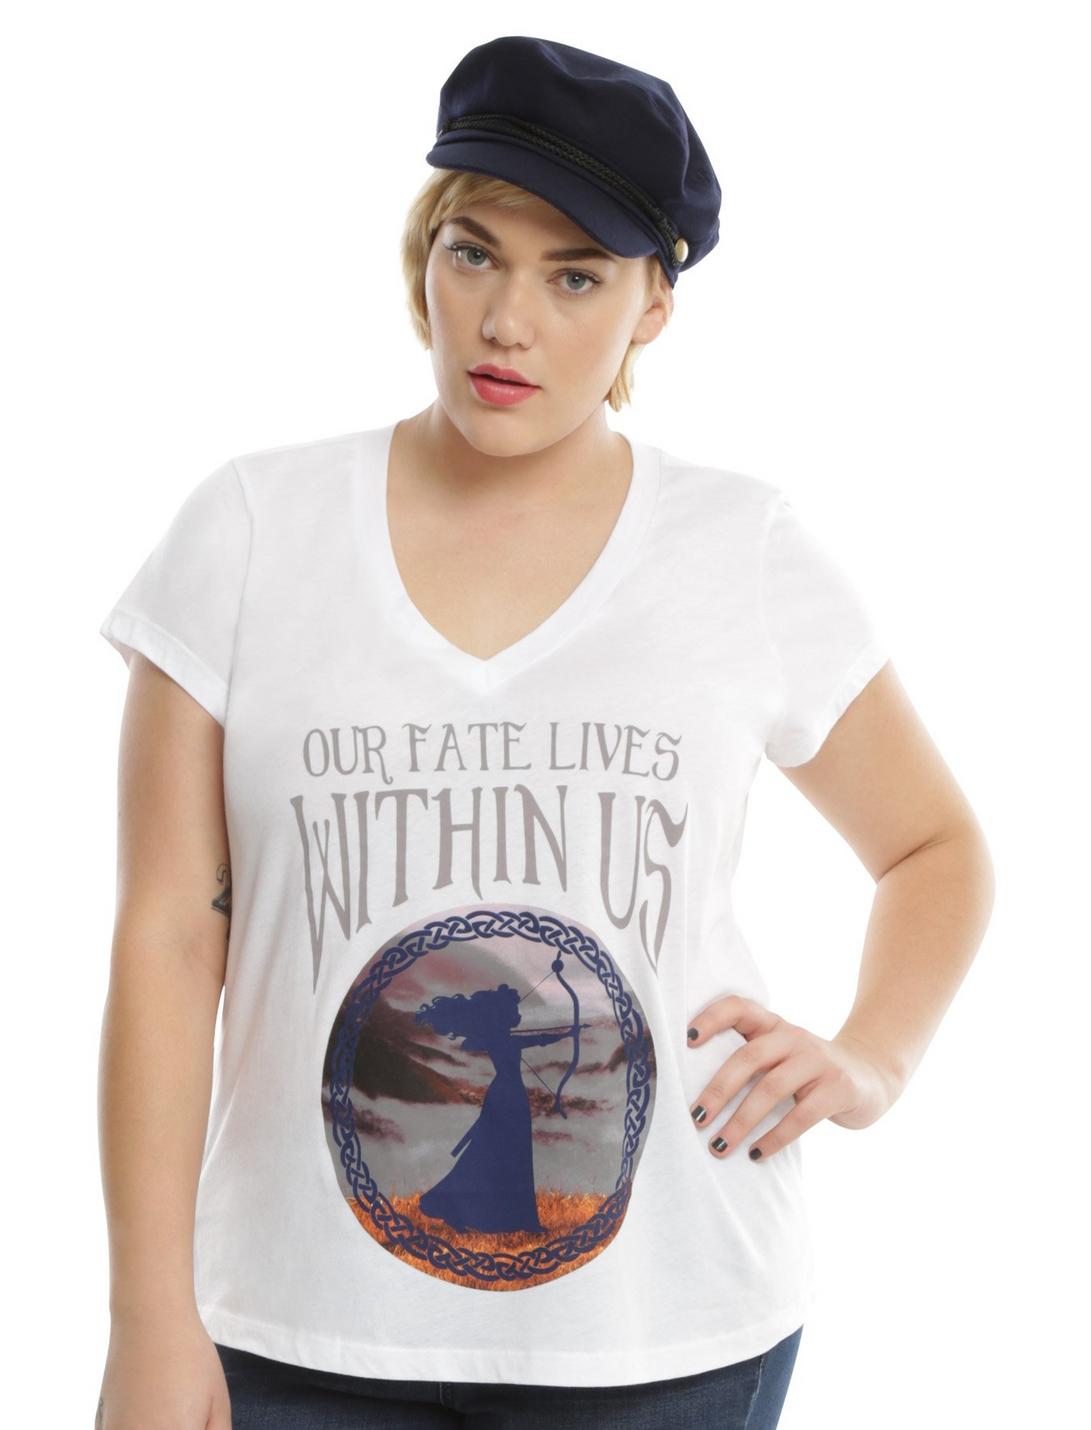 Disney Brave Fate Within Us Girls T-Shirt Plus Size, WHITE, hi-res